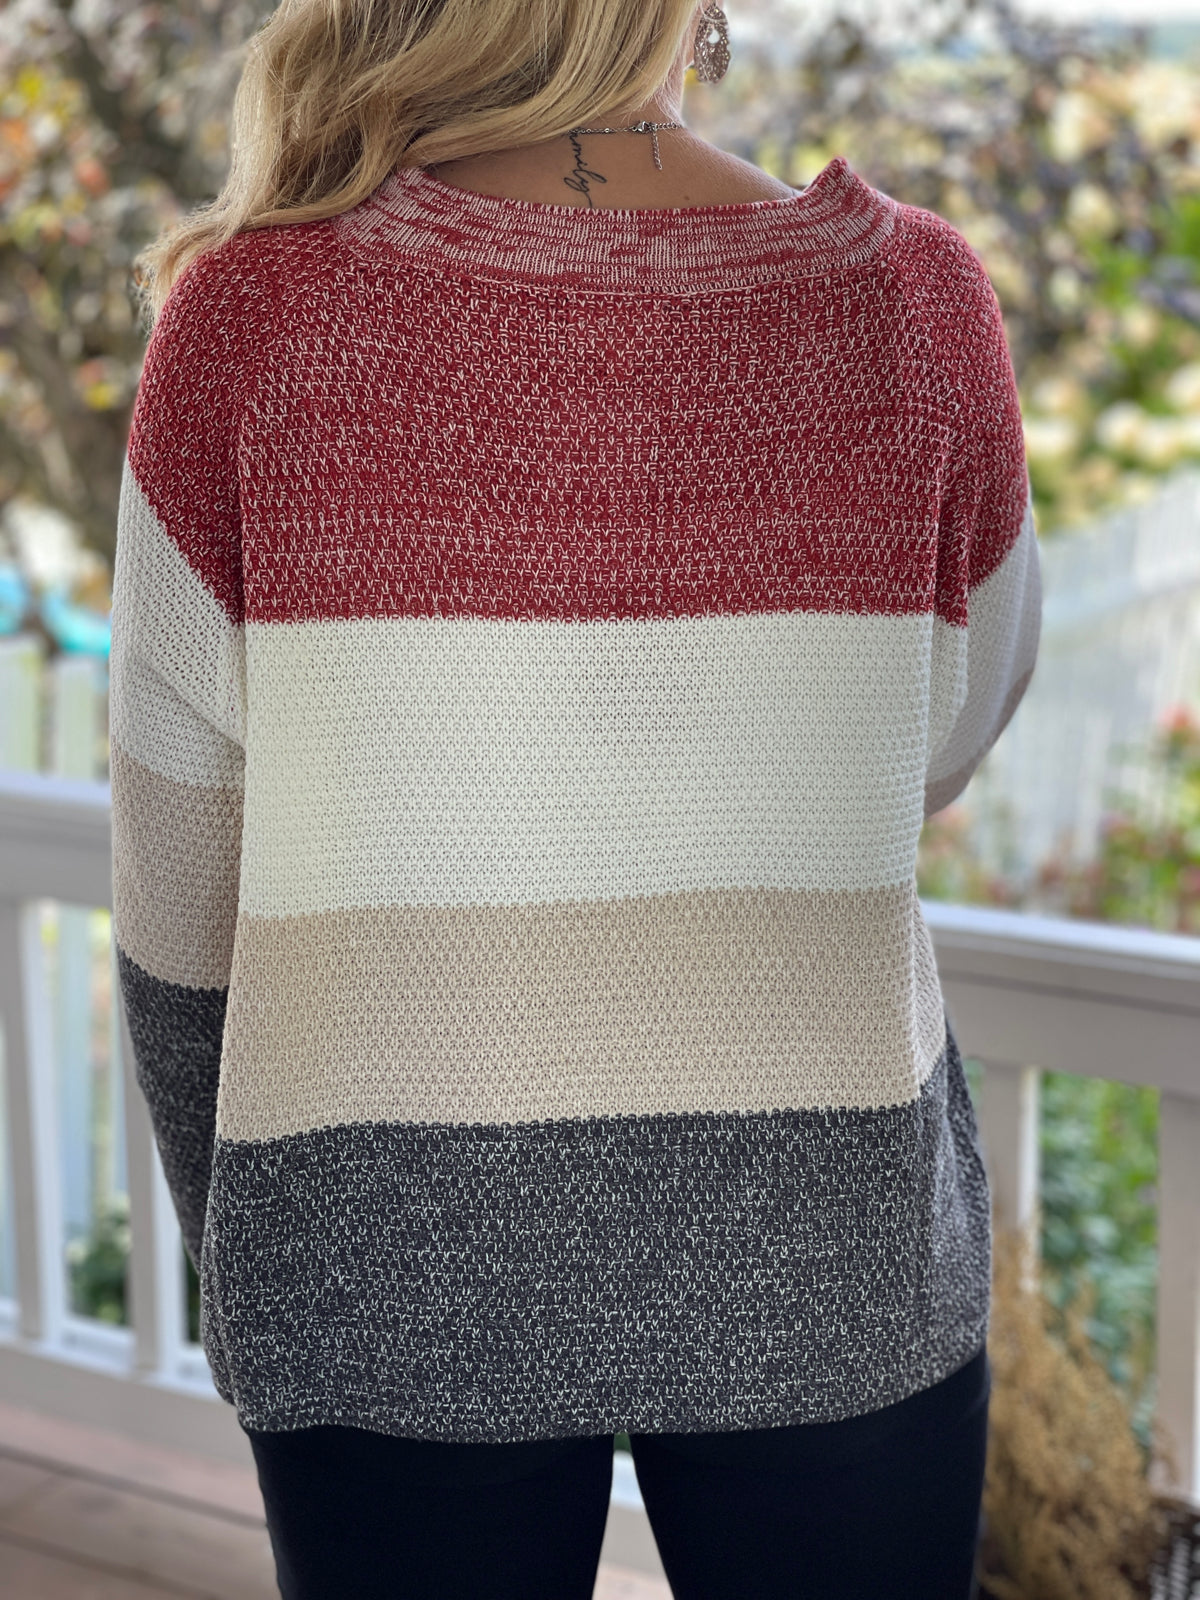 RUST/OATMEAL/CHARCOAL COLORBLOCK  BUTTON SWEATER